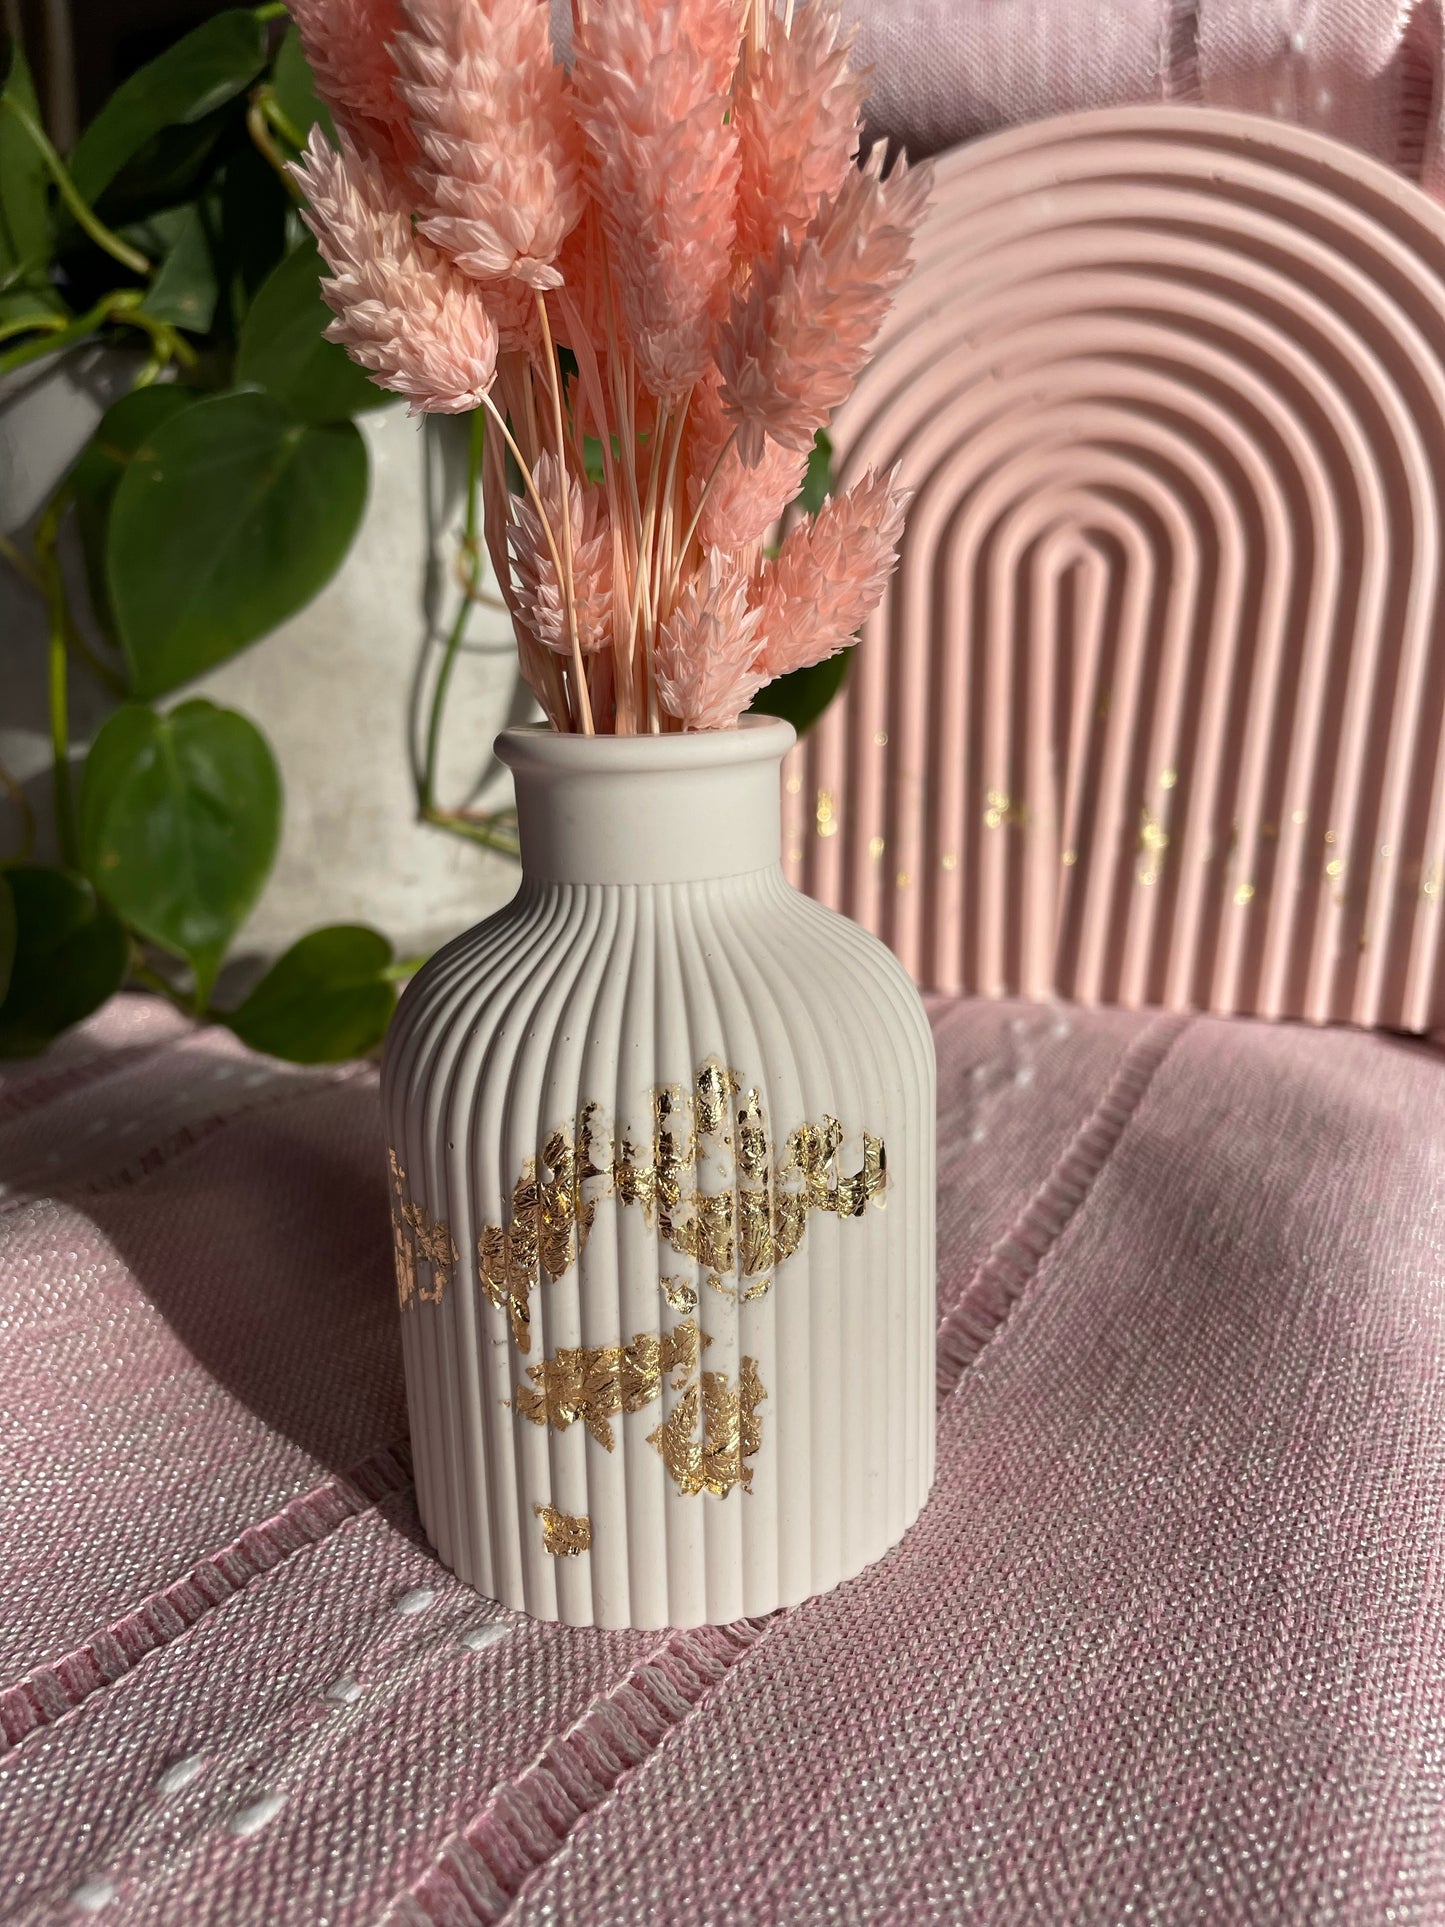 Dried Florals Vase- Home Decor, Boho Vibes, Functional.